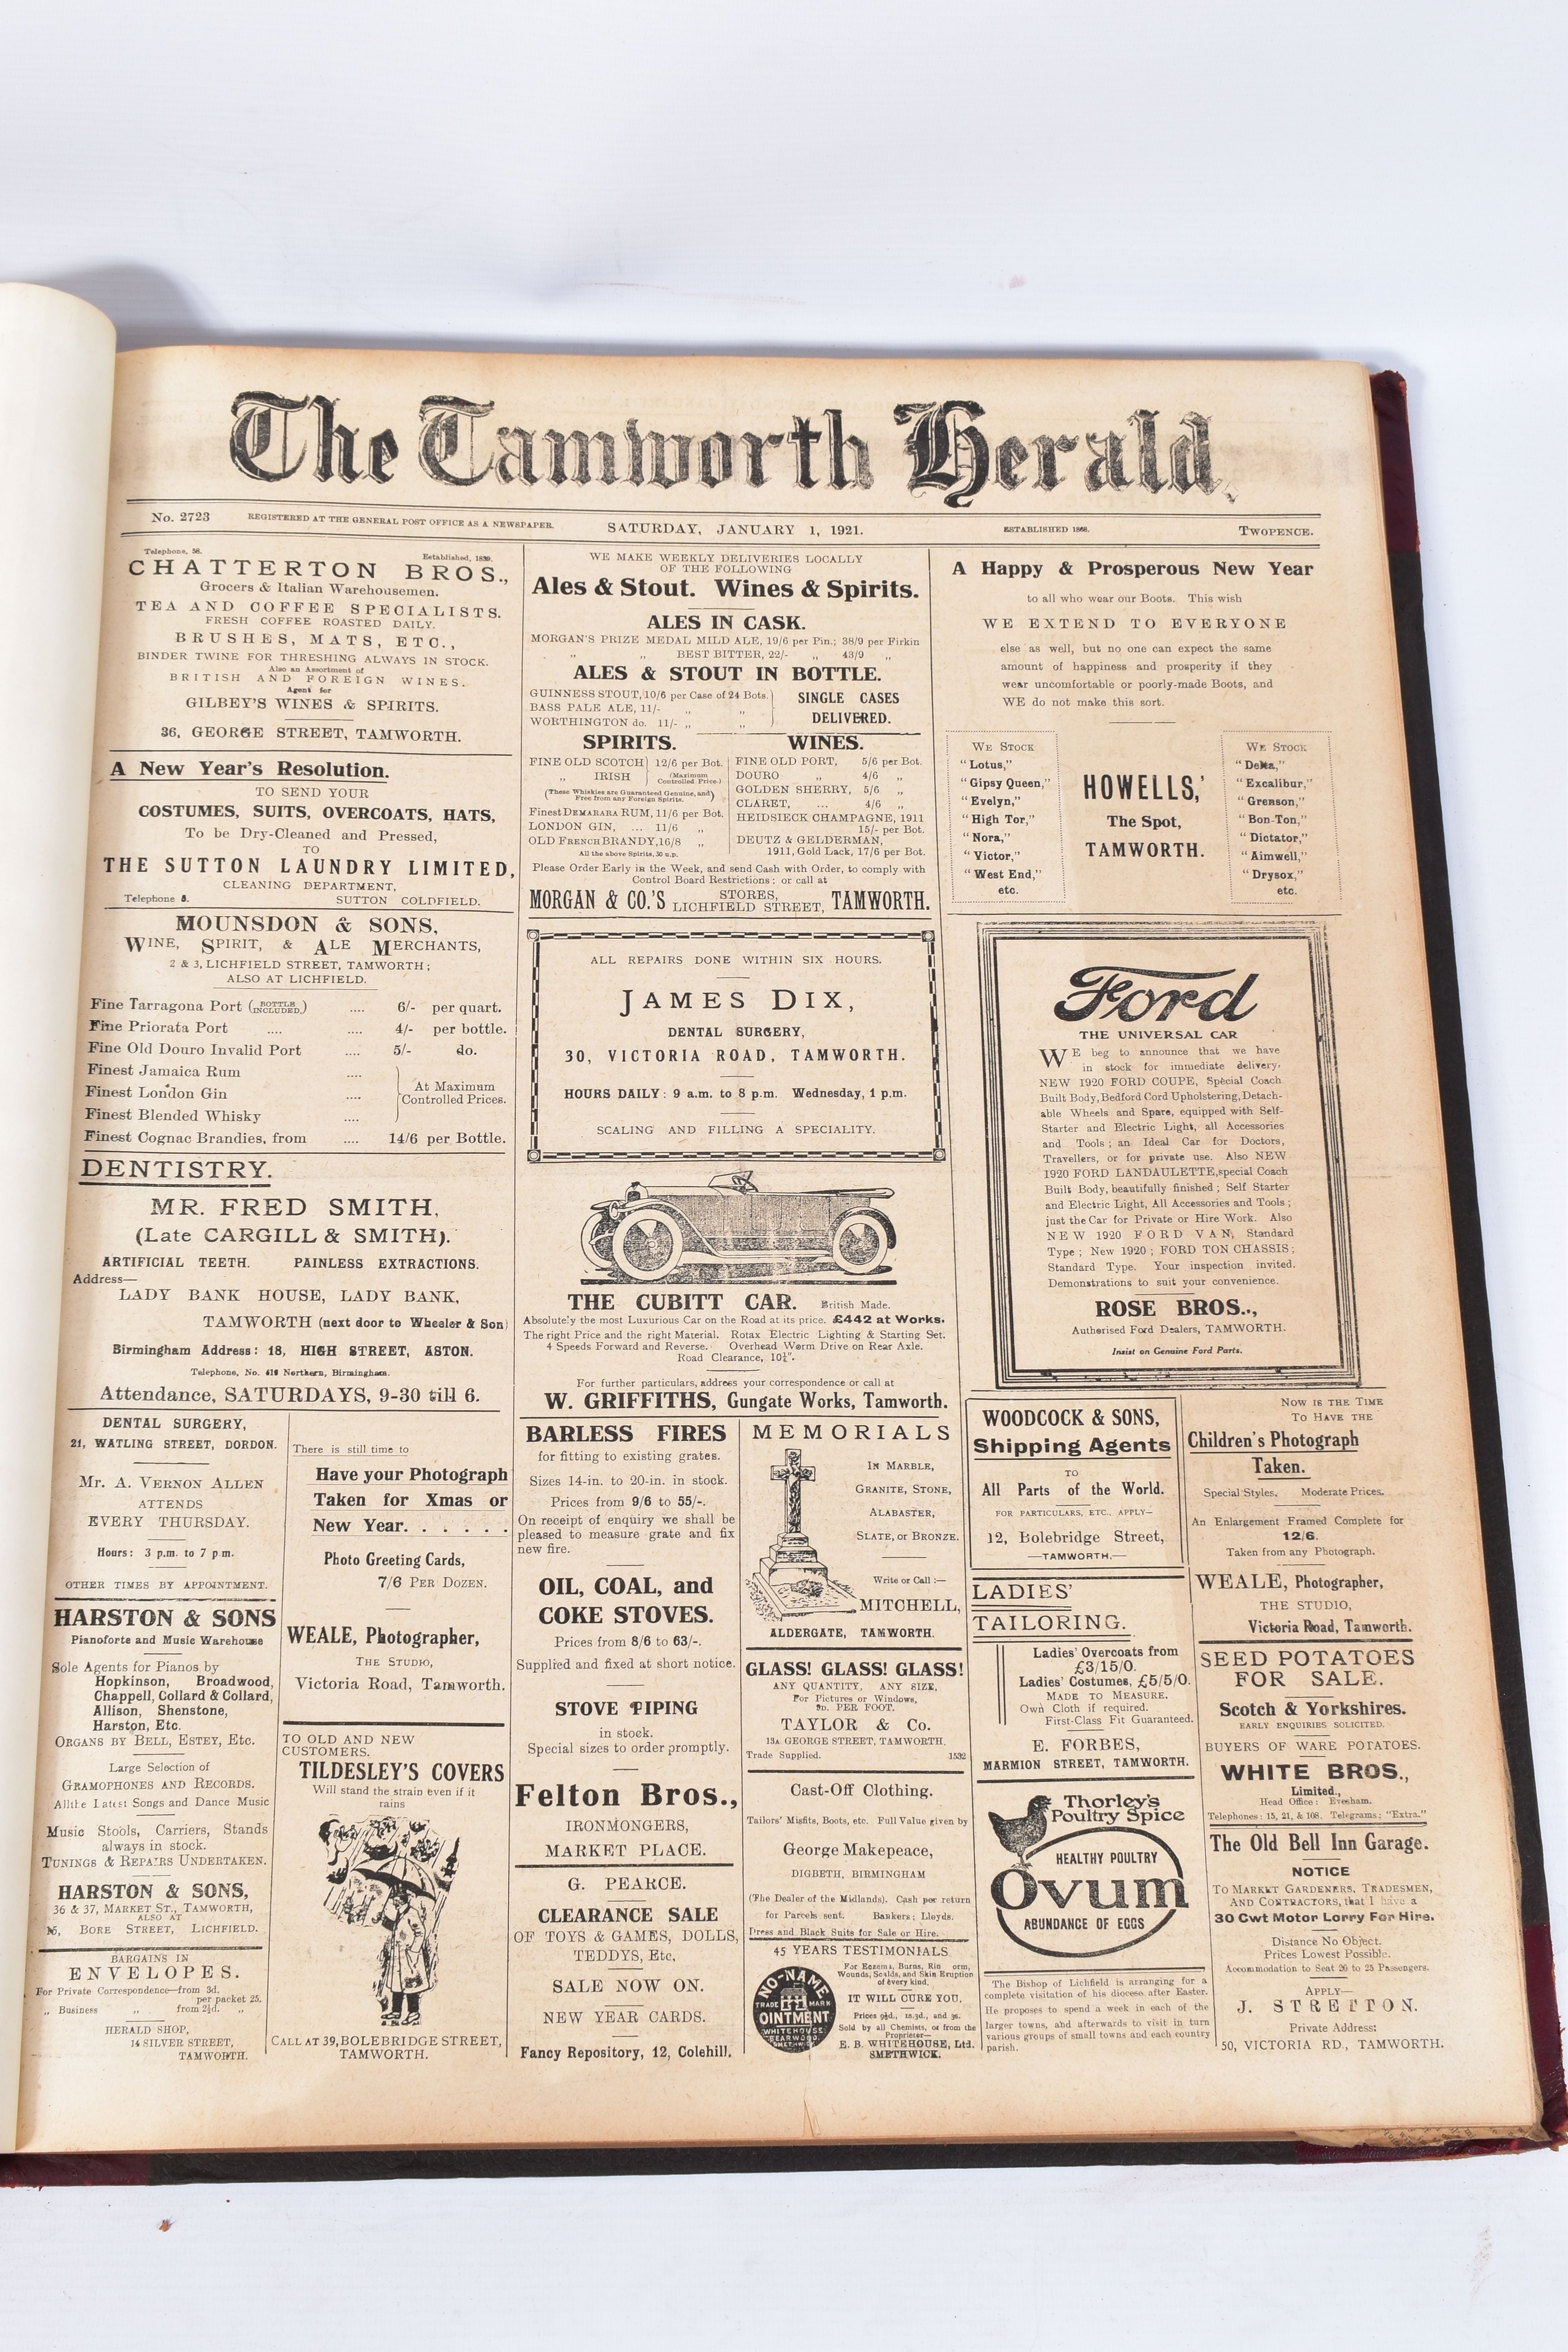 THE TAMWORTH HERALD, an Archive of the Tamworth Herald Newspaper from 1921, the newspapers are bound